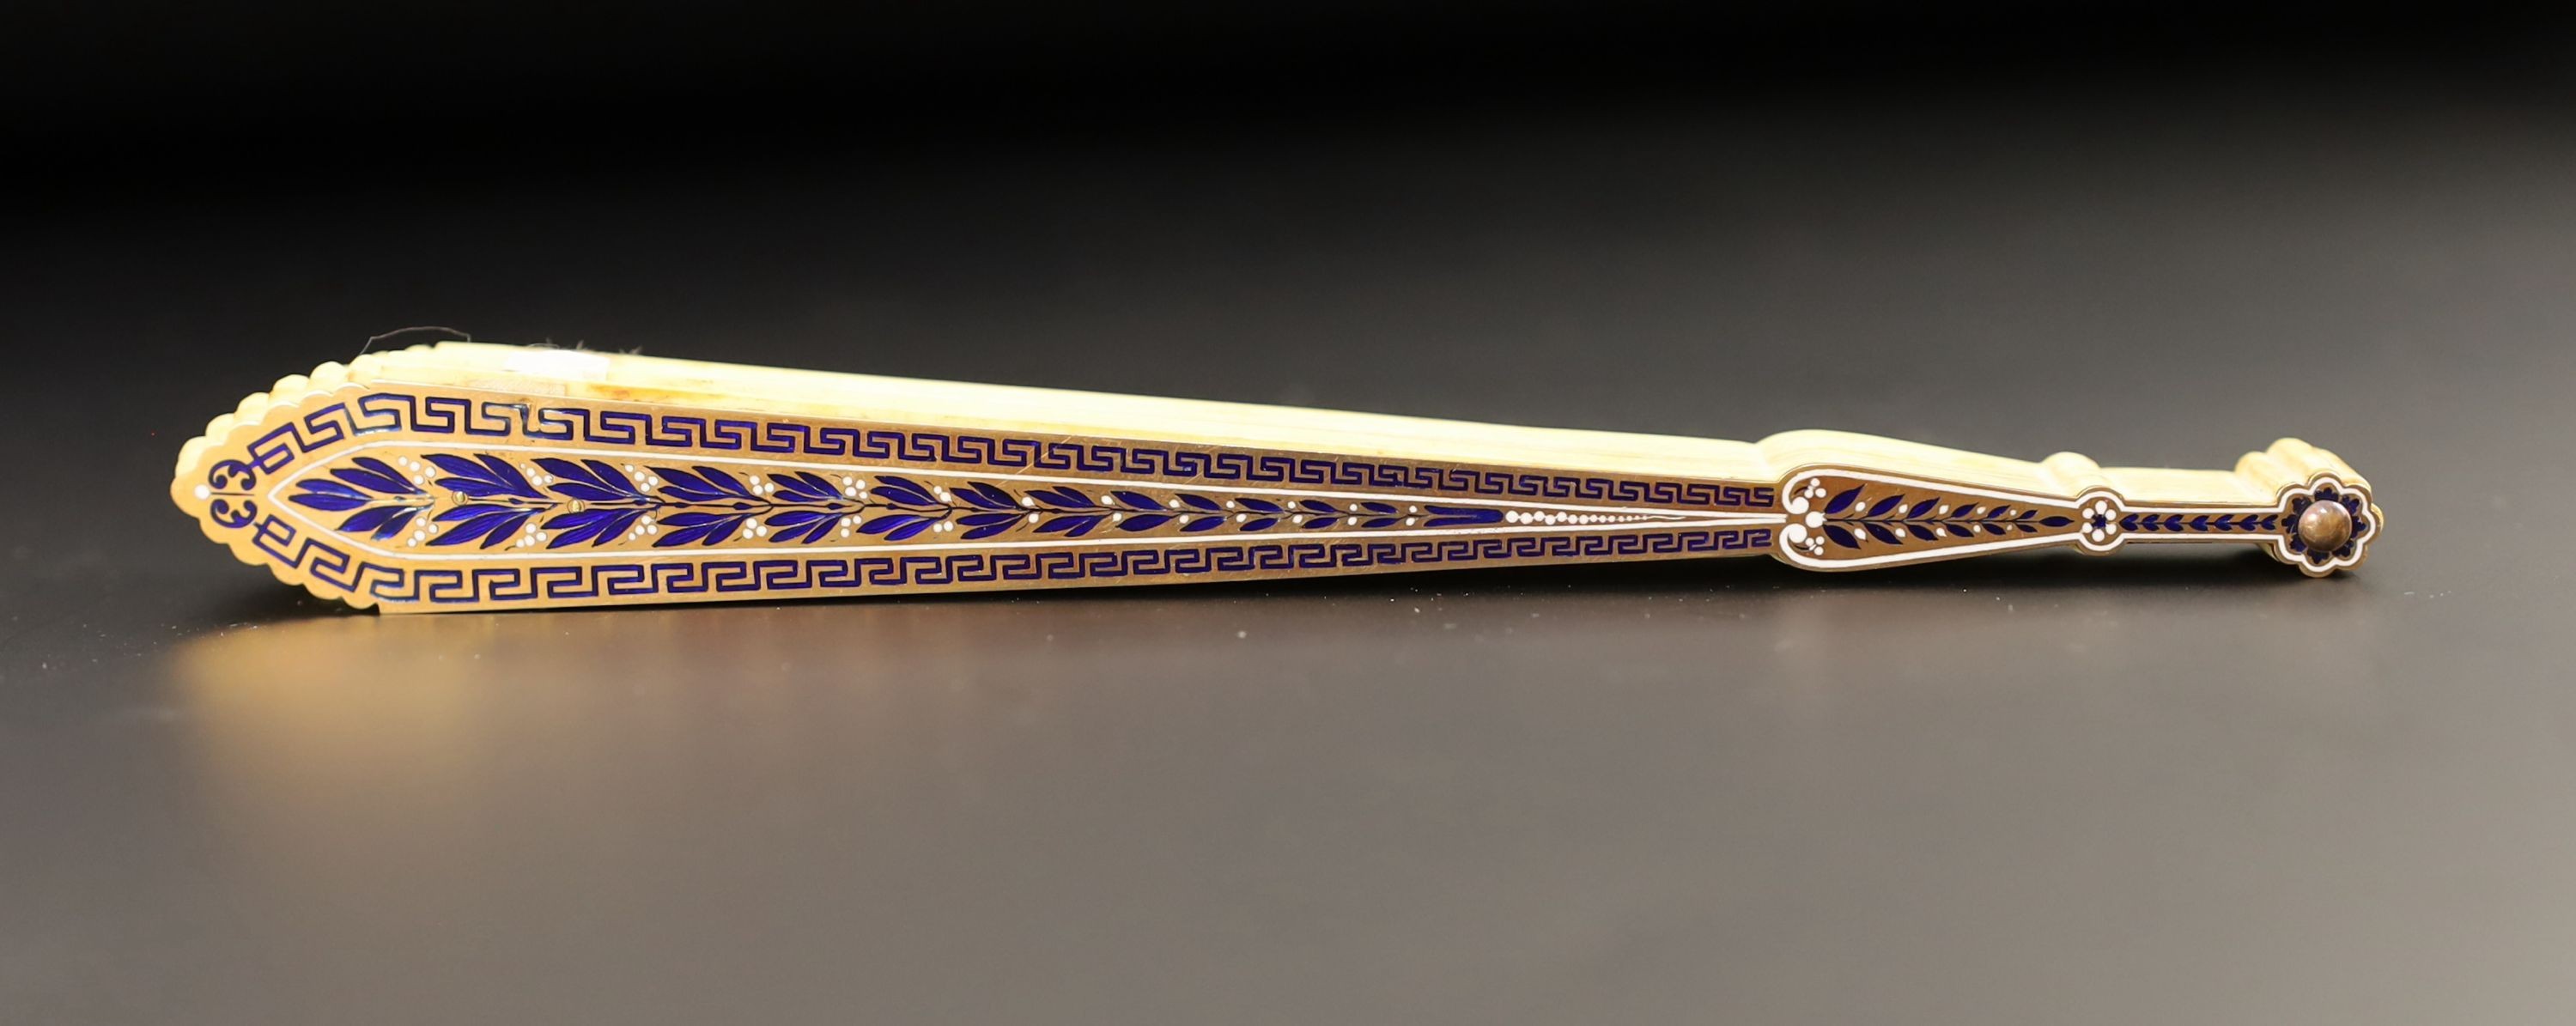 A German or Swiss gold, enamel and ivory brise fan, 19th century, possibly made for the Ottoman market, 17.3 cm closed, slight losses to sticks, needs rethreading